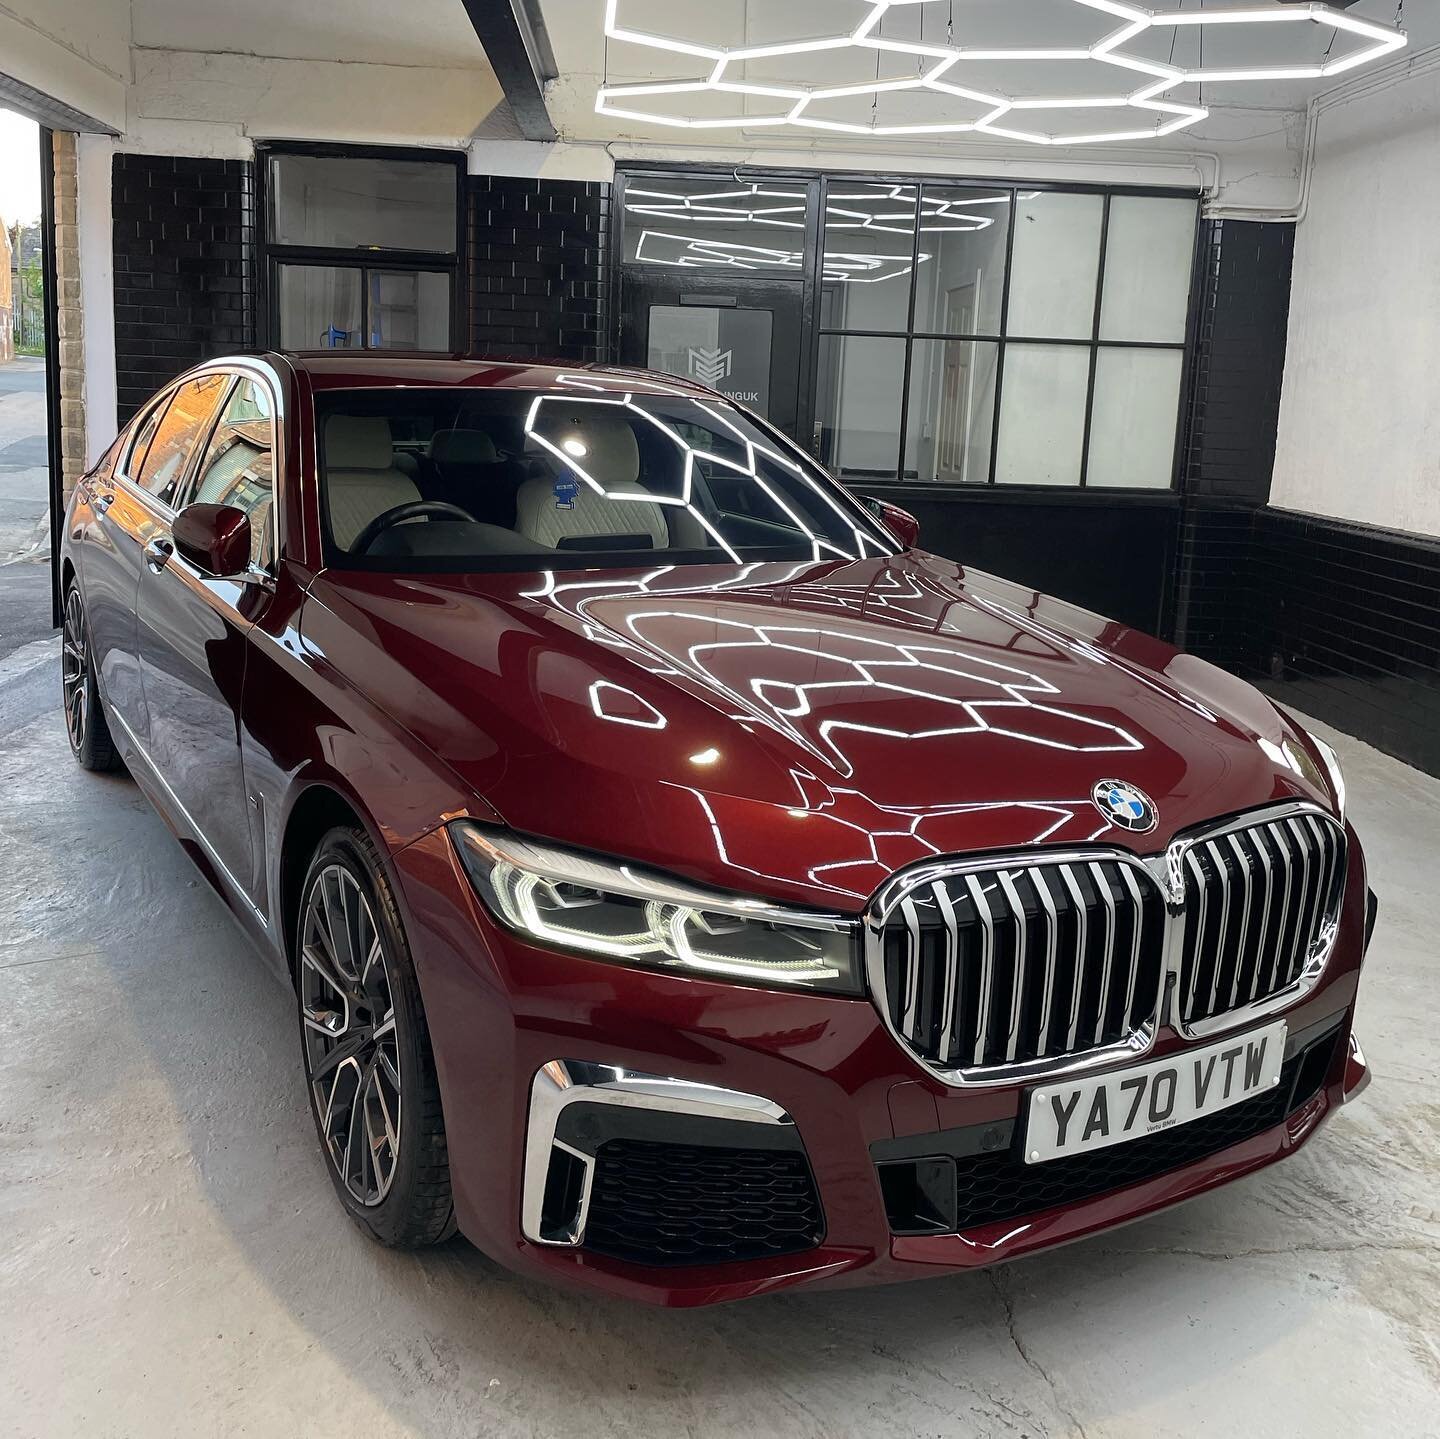 💥STAGE 1 CORRECTION CARRIED OUT ON THIS BMW 745E, NOW LOOK AT THAT FINISH💥

&bull;Full safety Maintenance wash
&bull;Full decontamination 
&bull;Clay bar 
&bull;Iron fallout 
&bull;Tar &amp; glue removal 
&bull;Single stage (removing light scratche